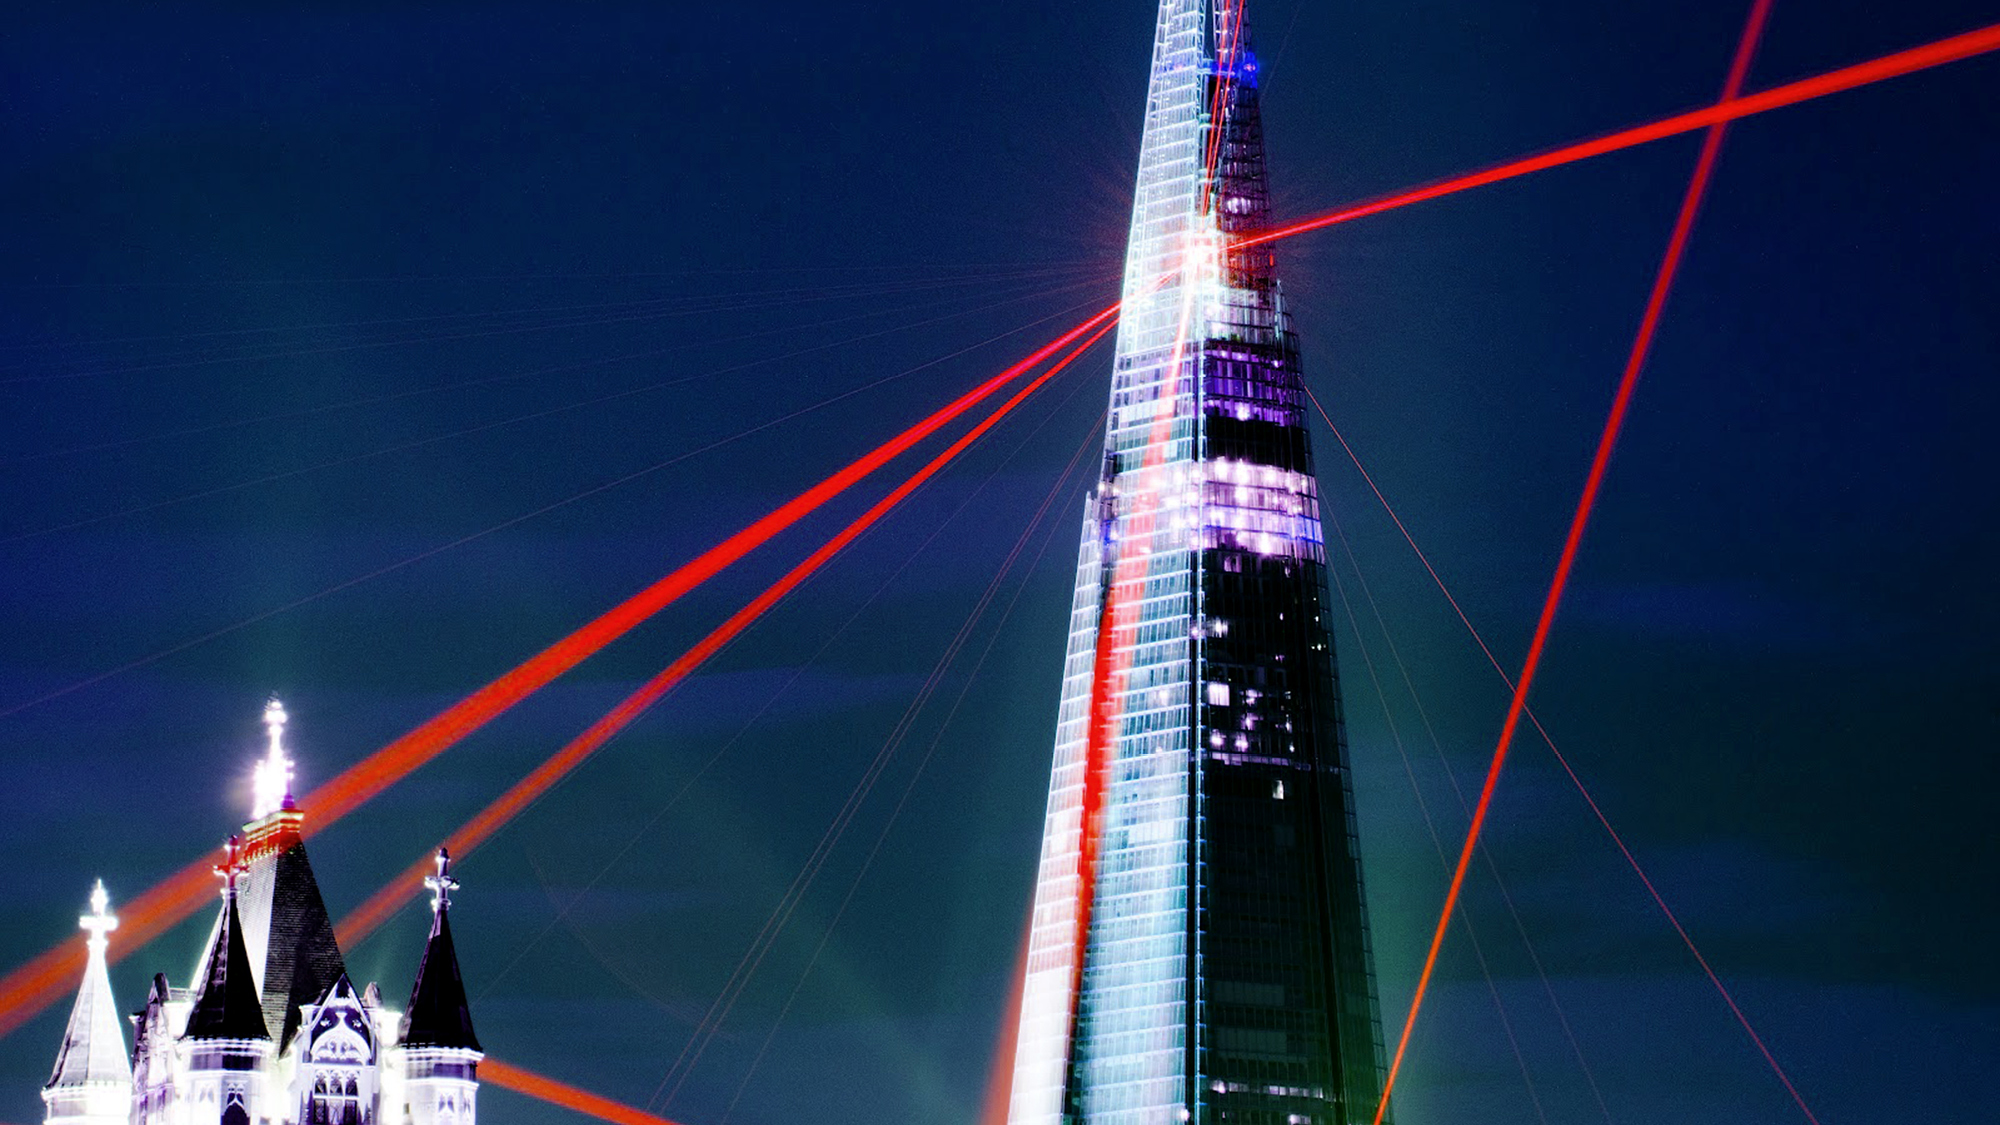 Entity-3-Three-Brand-Design-Agency-Sydney-The-Shard-14-experience-launch-event-laser-display